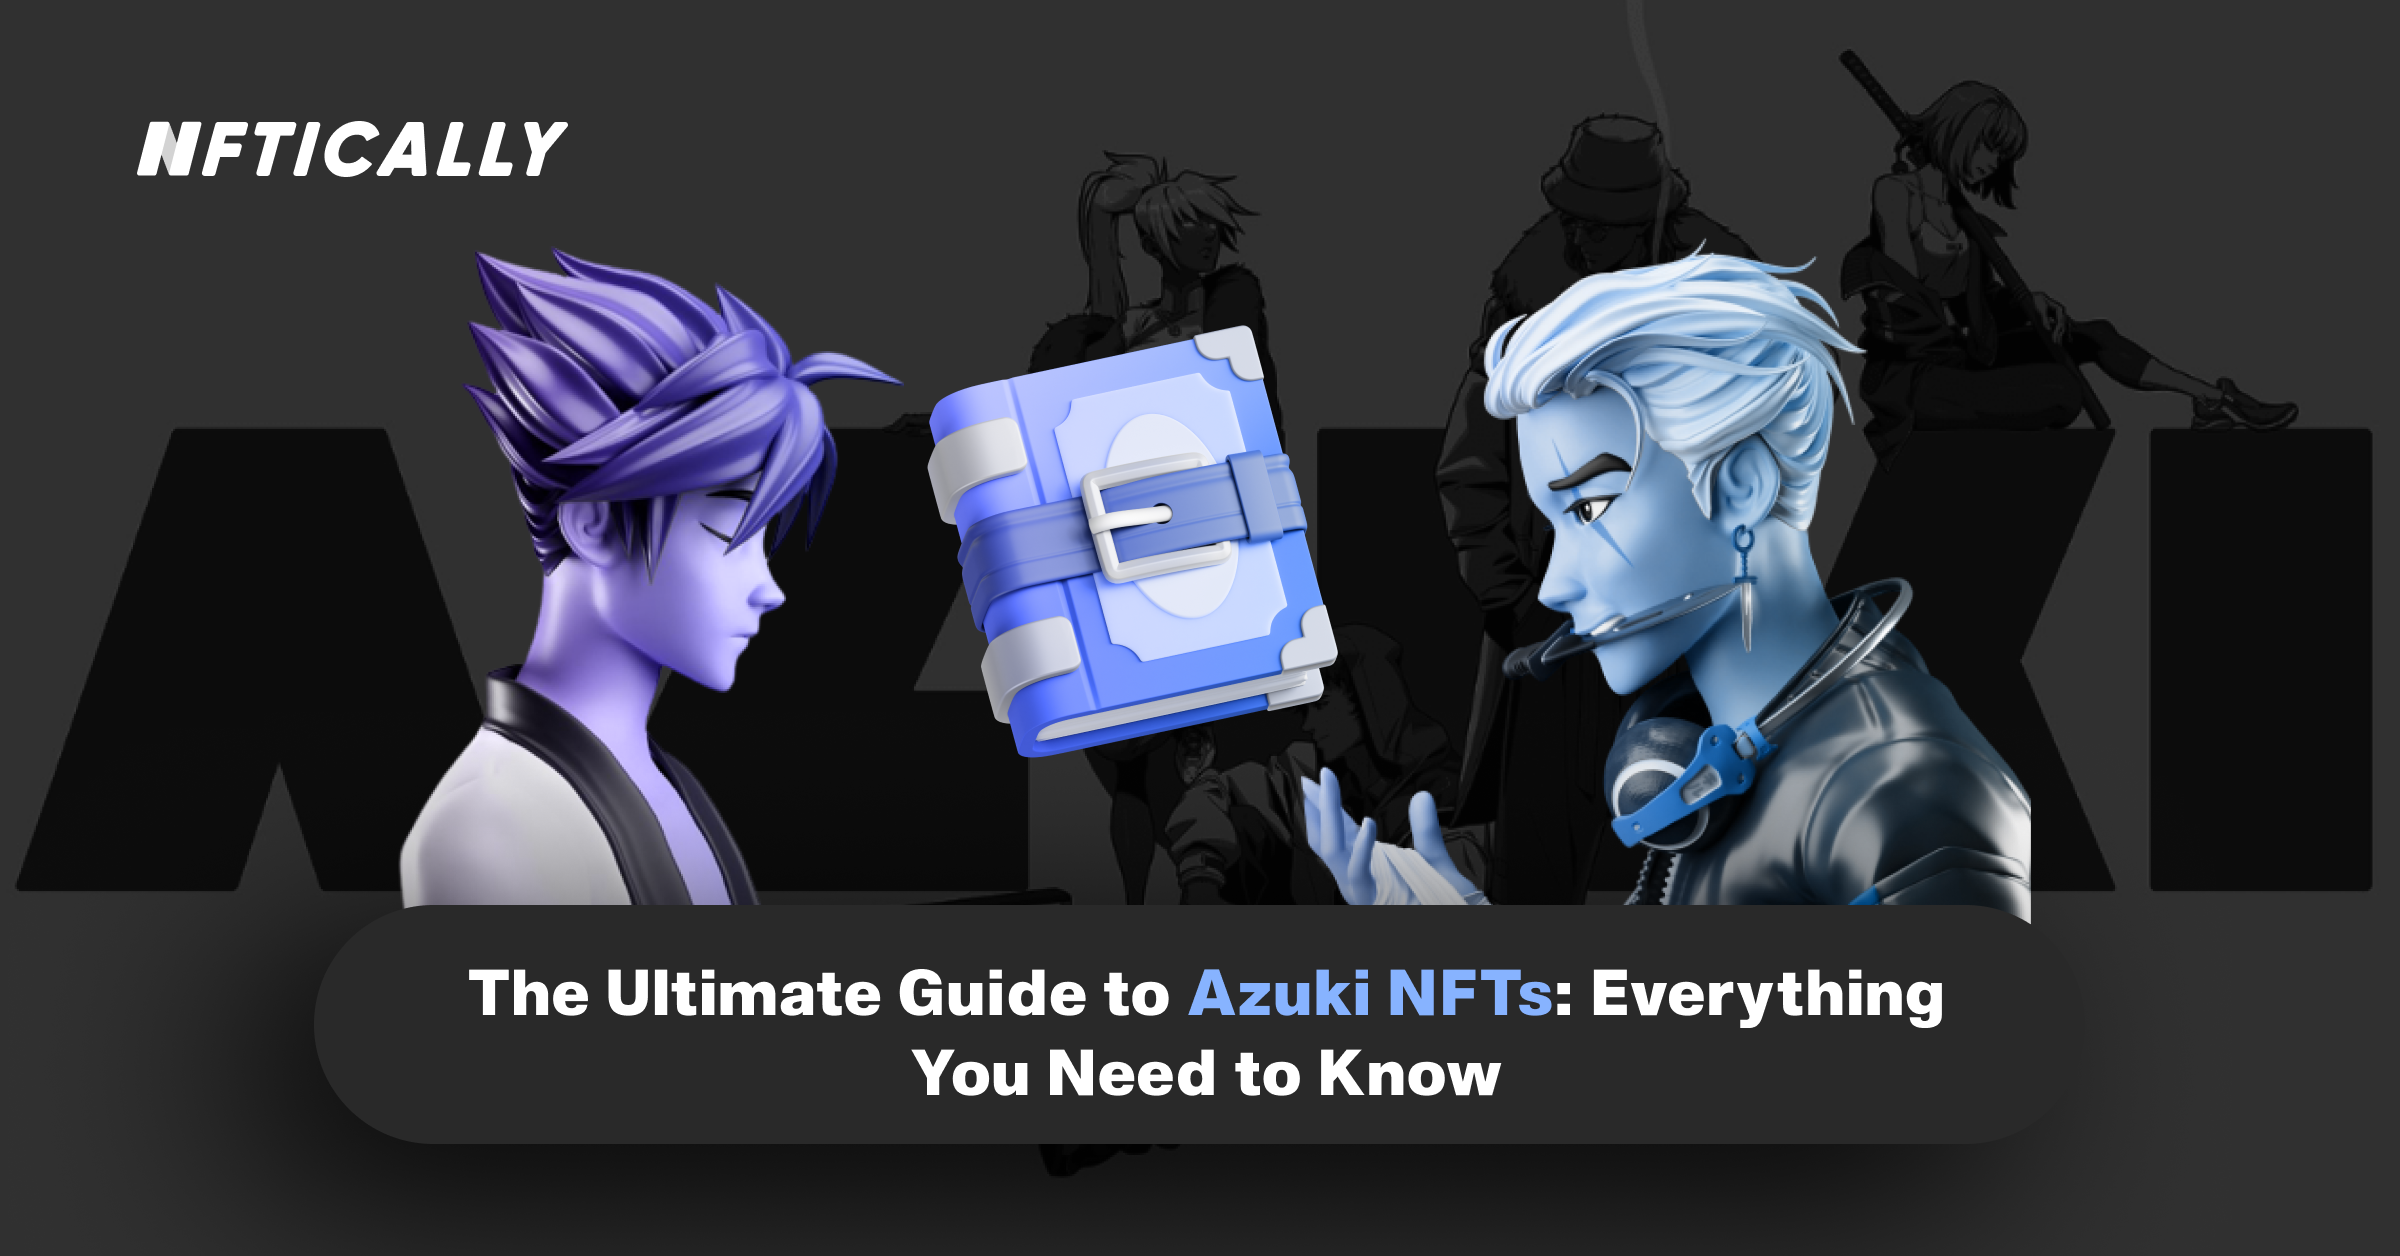 The Ultimate Guide to Azuki NFTs